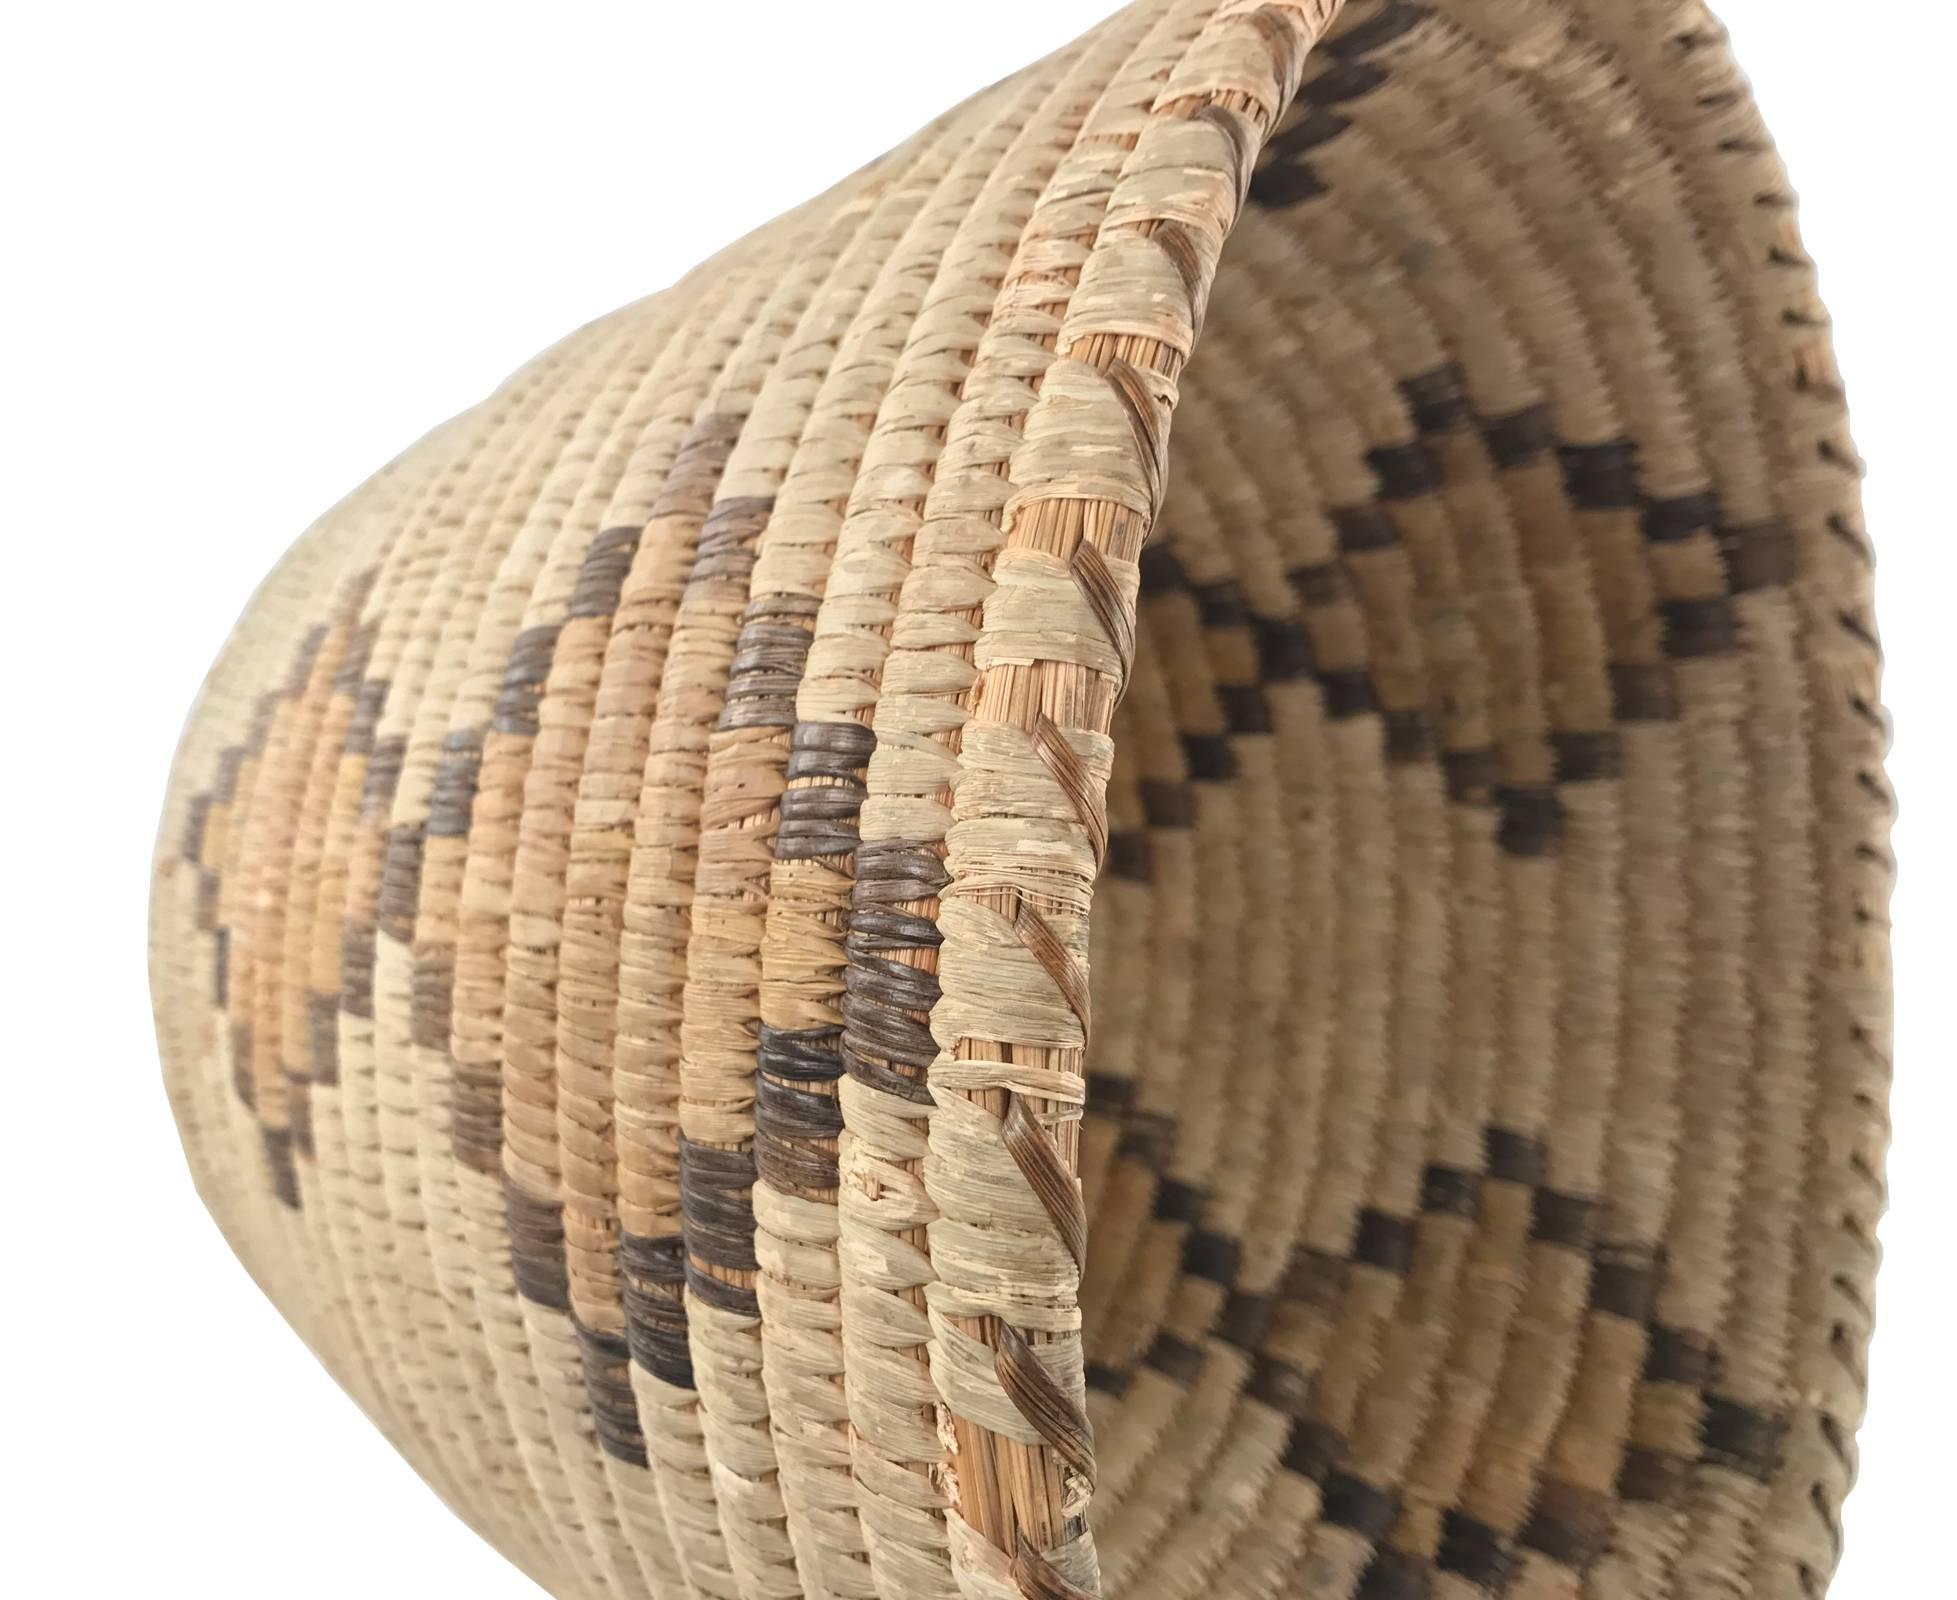 Twined Native American Basket with Diamond Motif 1